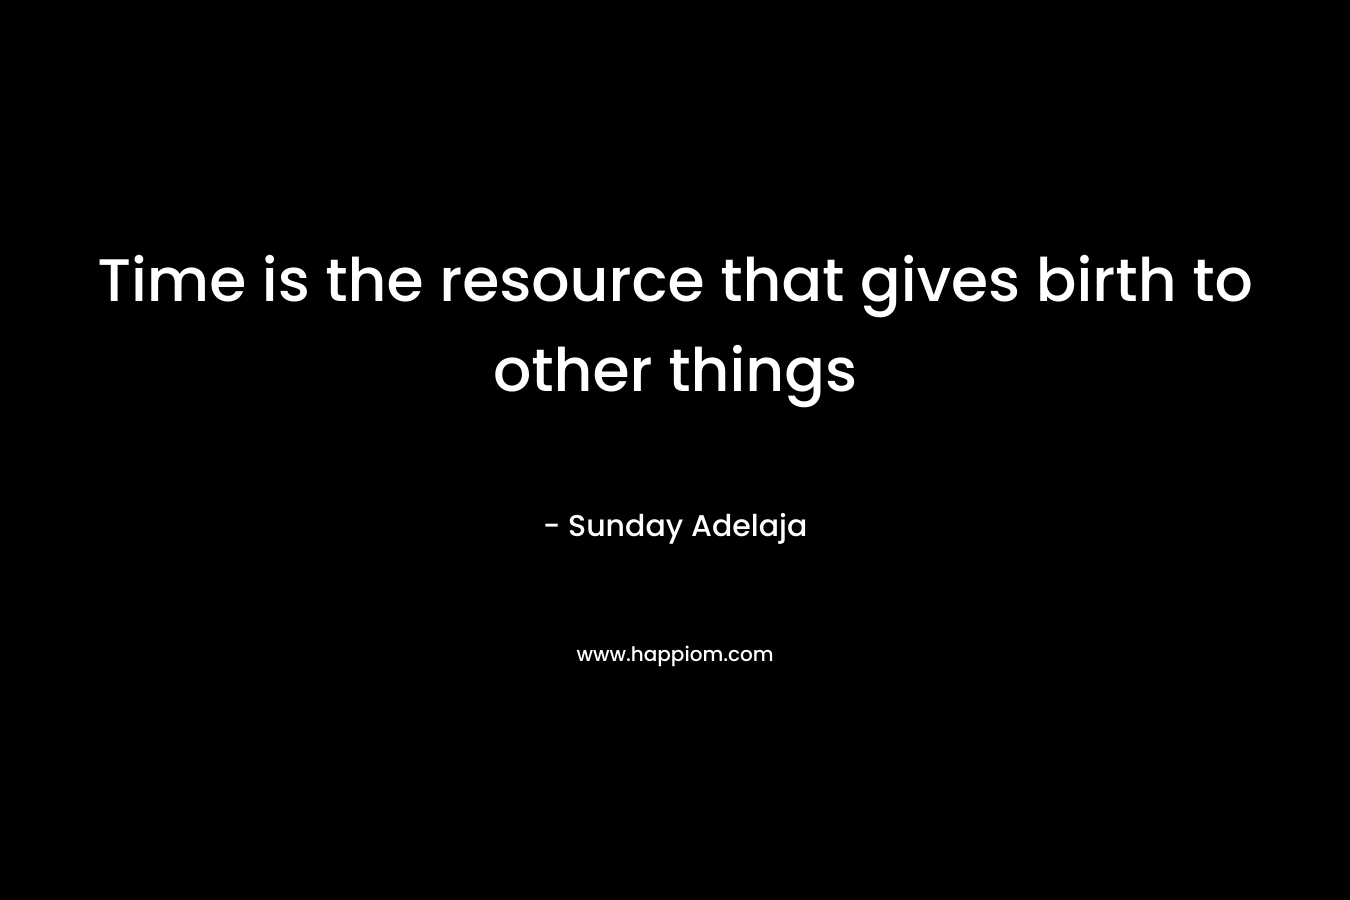 Time is the resource that gives birth to other things